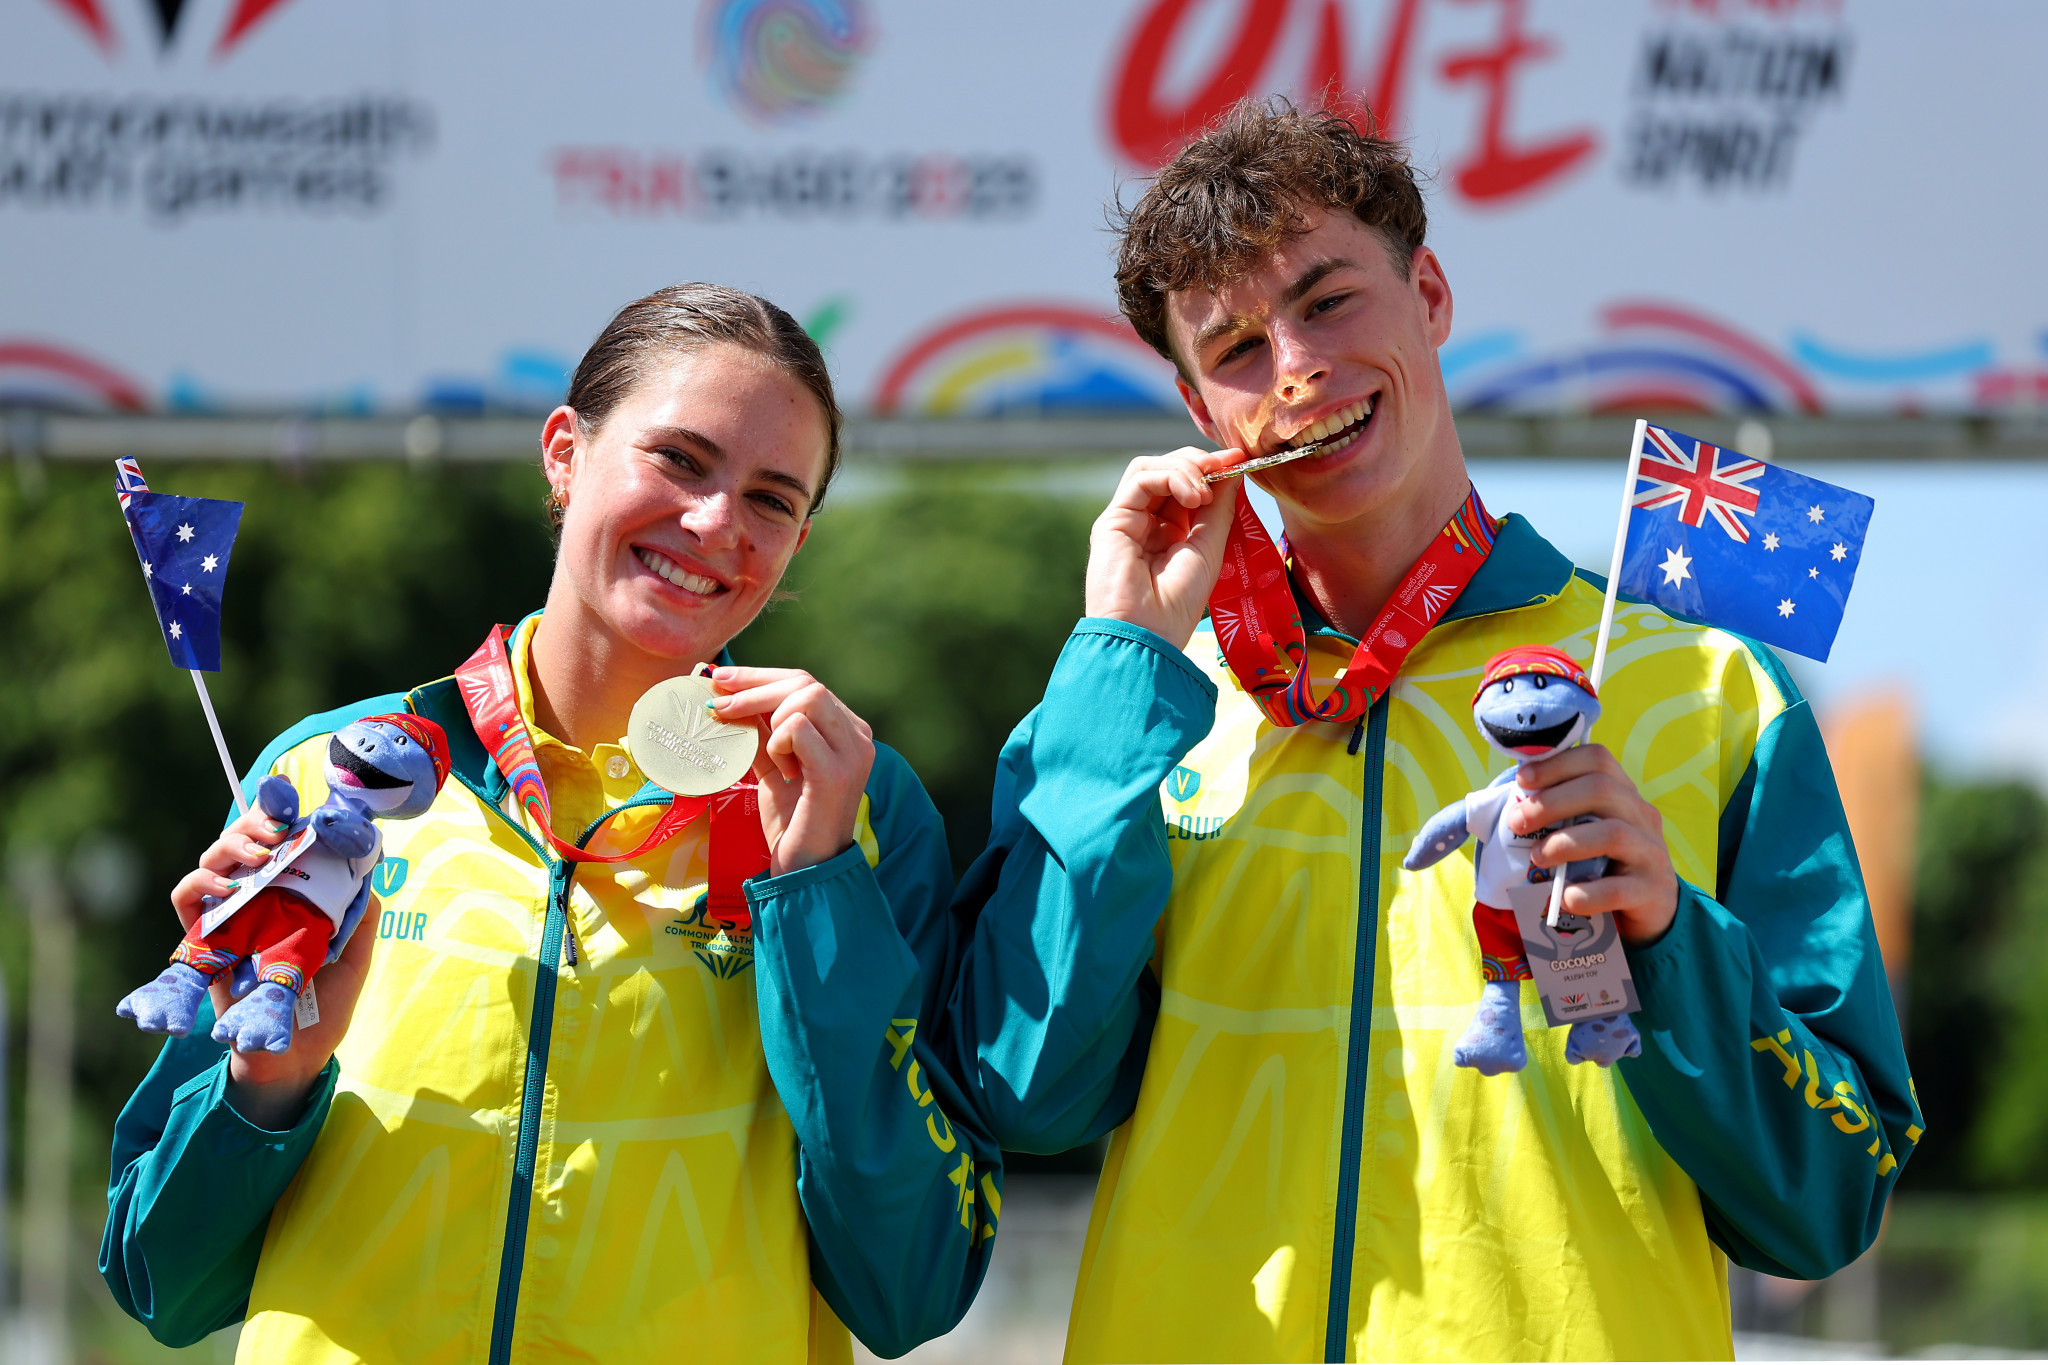 Aspen Anderson, left, and Jack Latham, right, took the mixed team relay triathlon gold for Australia ©Getty Images